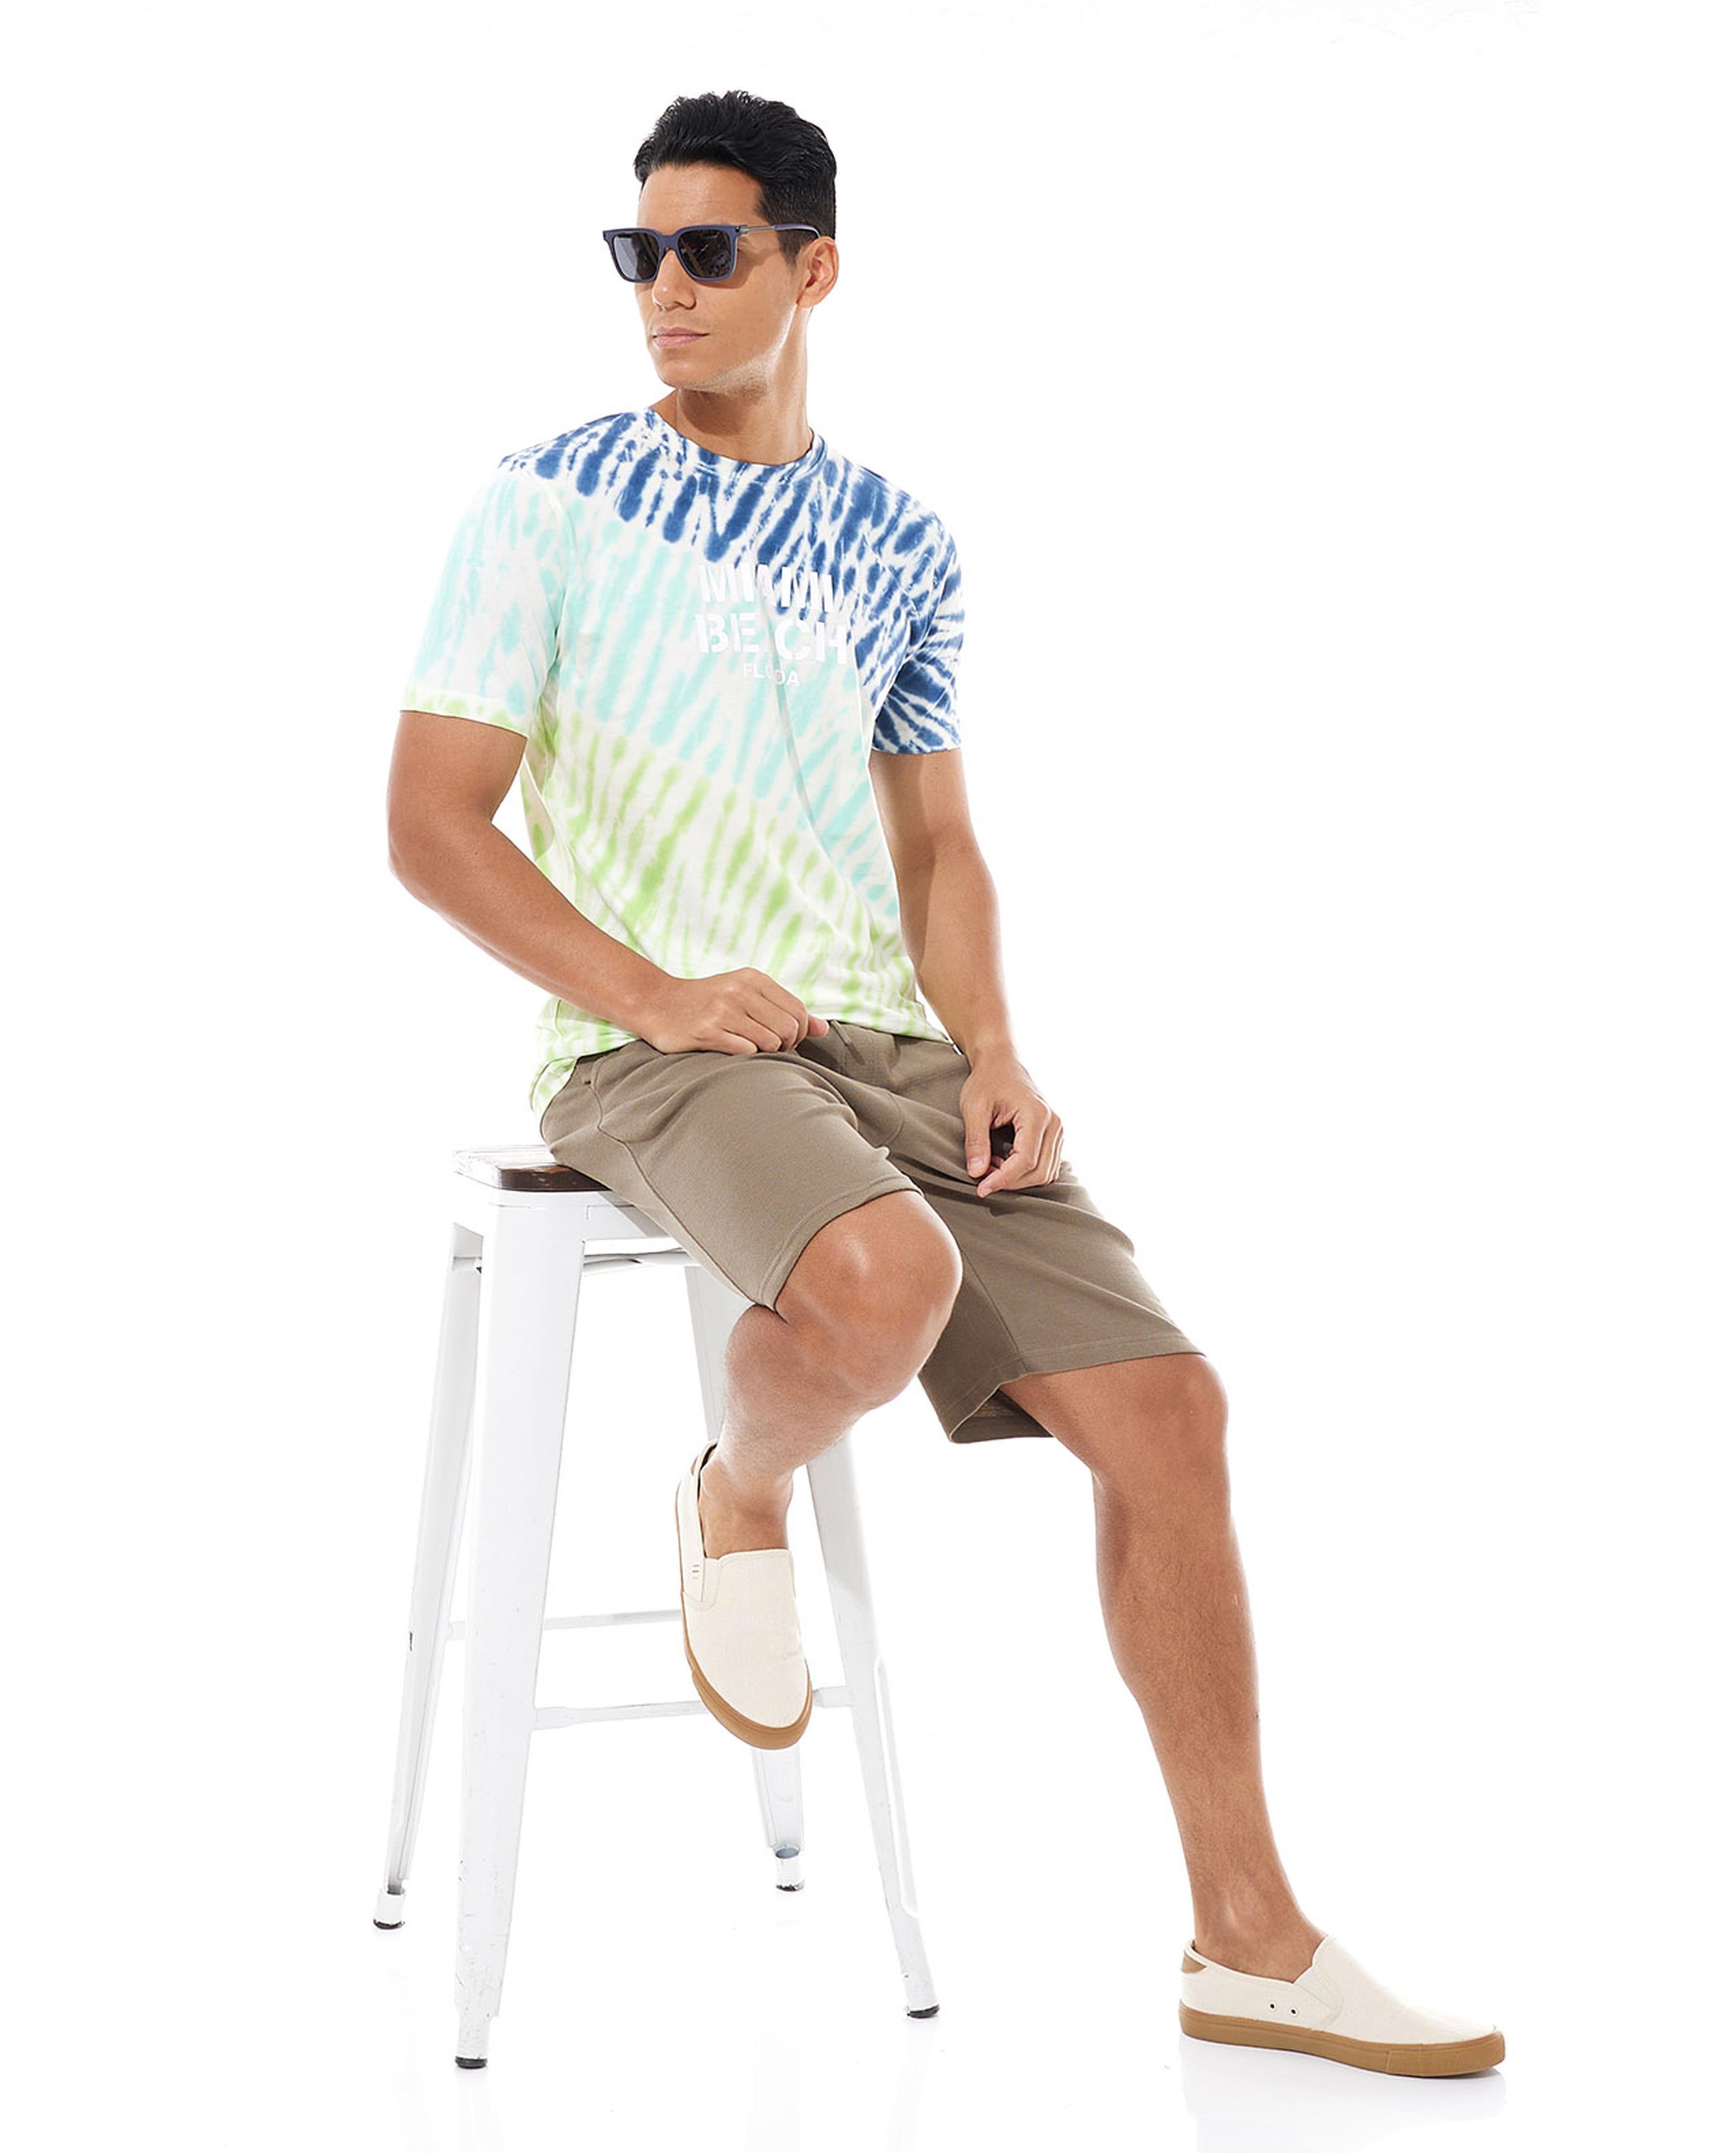 Tie-Dye Printed T-Shirt with Crew Neck and Short Sleeves